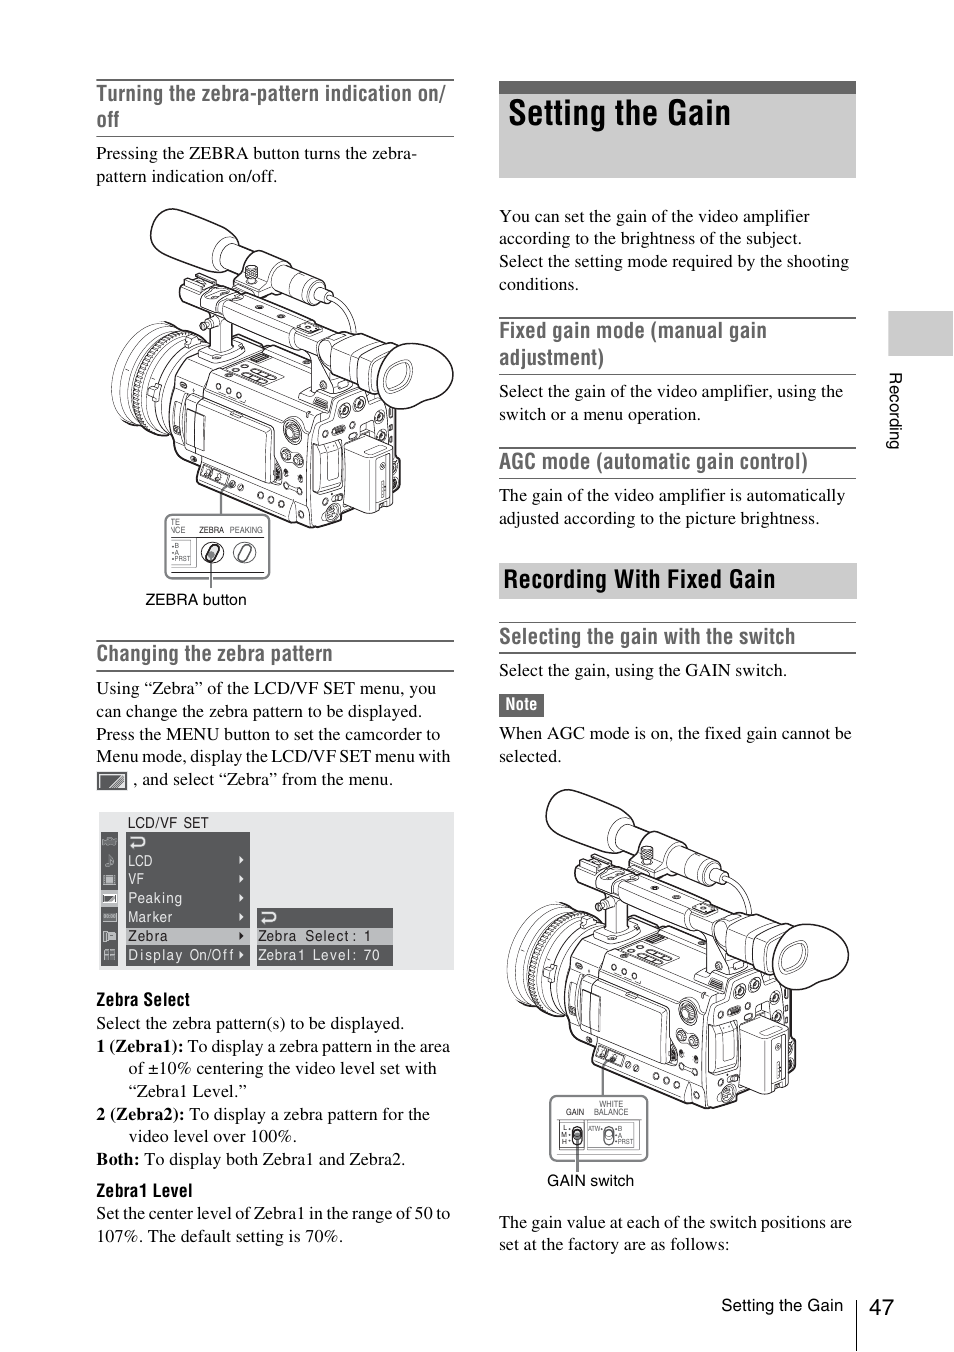 Setting the gain, Recording with fixed gain, Turning the zebra-pattern indication on/ off | Changing the zebra pattern, Fixed gain mode (manual gain adjustment), Agc mode (automatic gain control), Selecting the gain with the switch | Sony PMW-F3K User Manual | Page 47 / 164